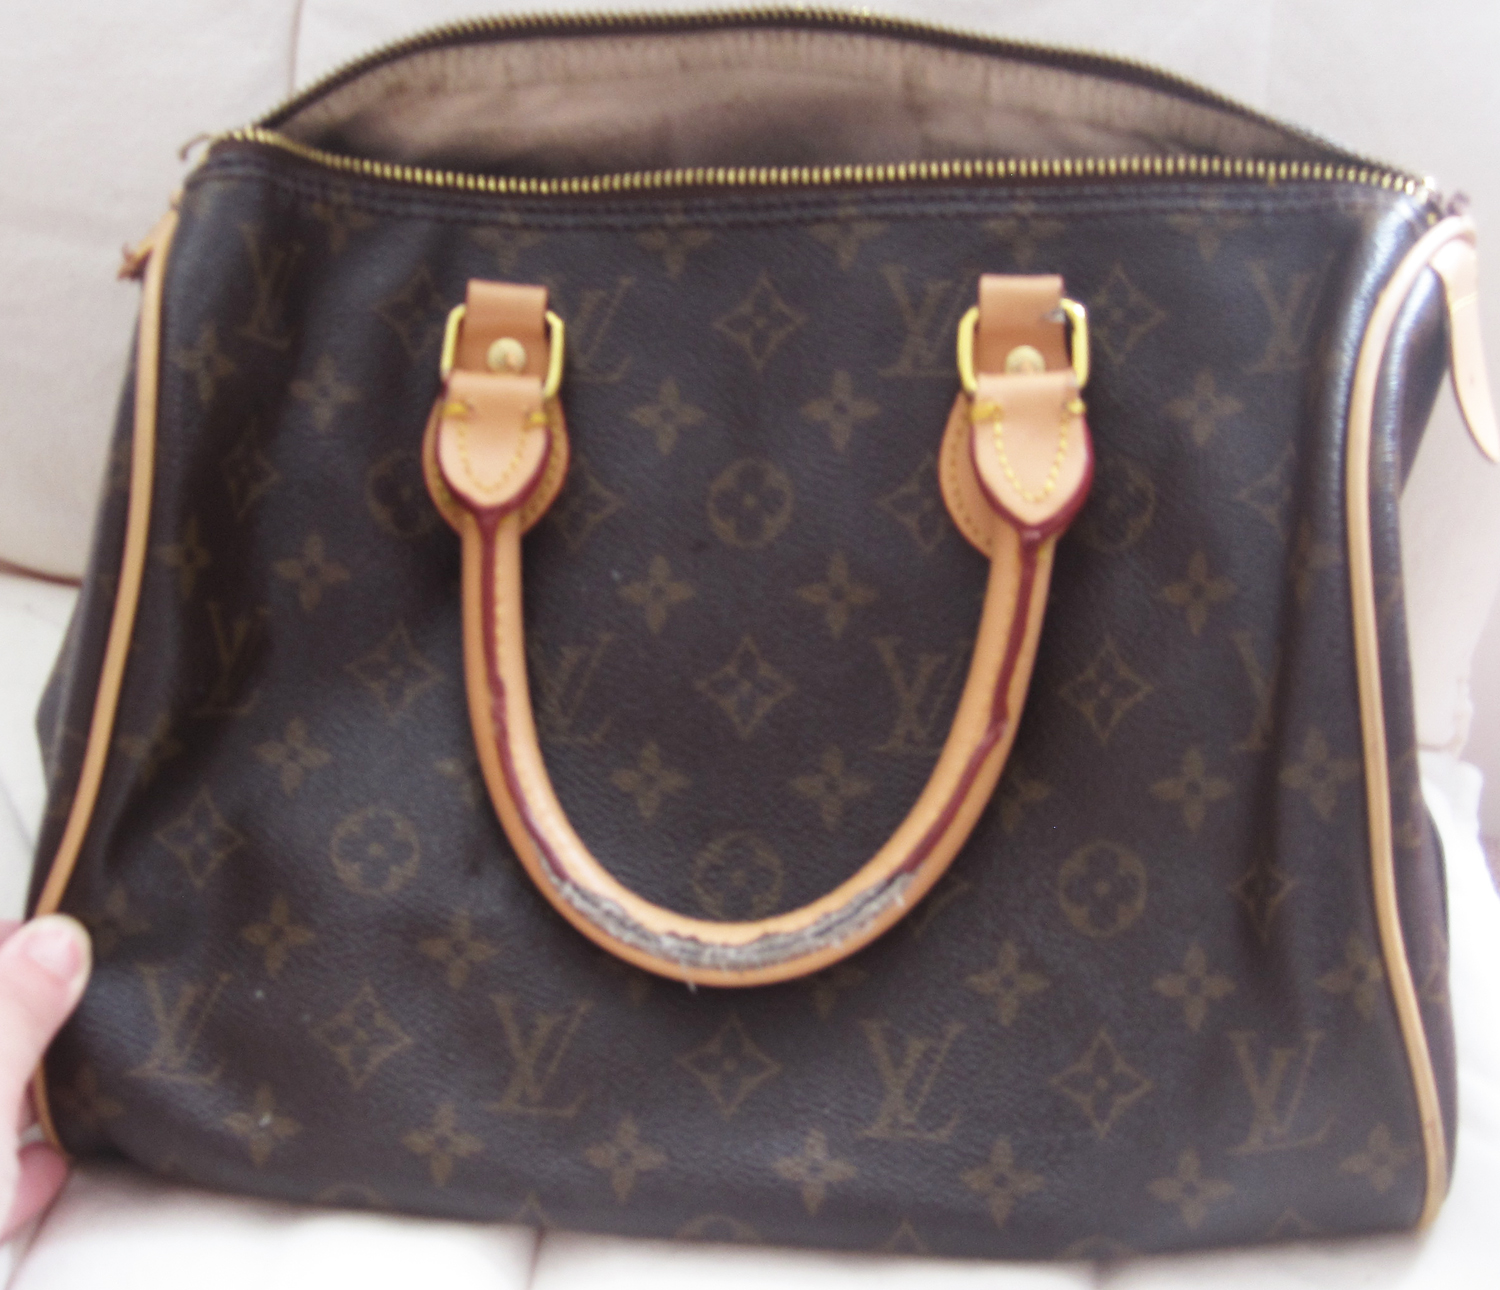 What’s Inside of a Fake Louis Vuitton Speedy?